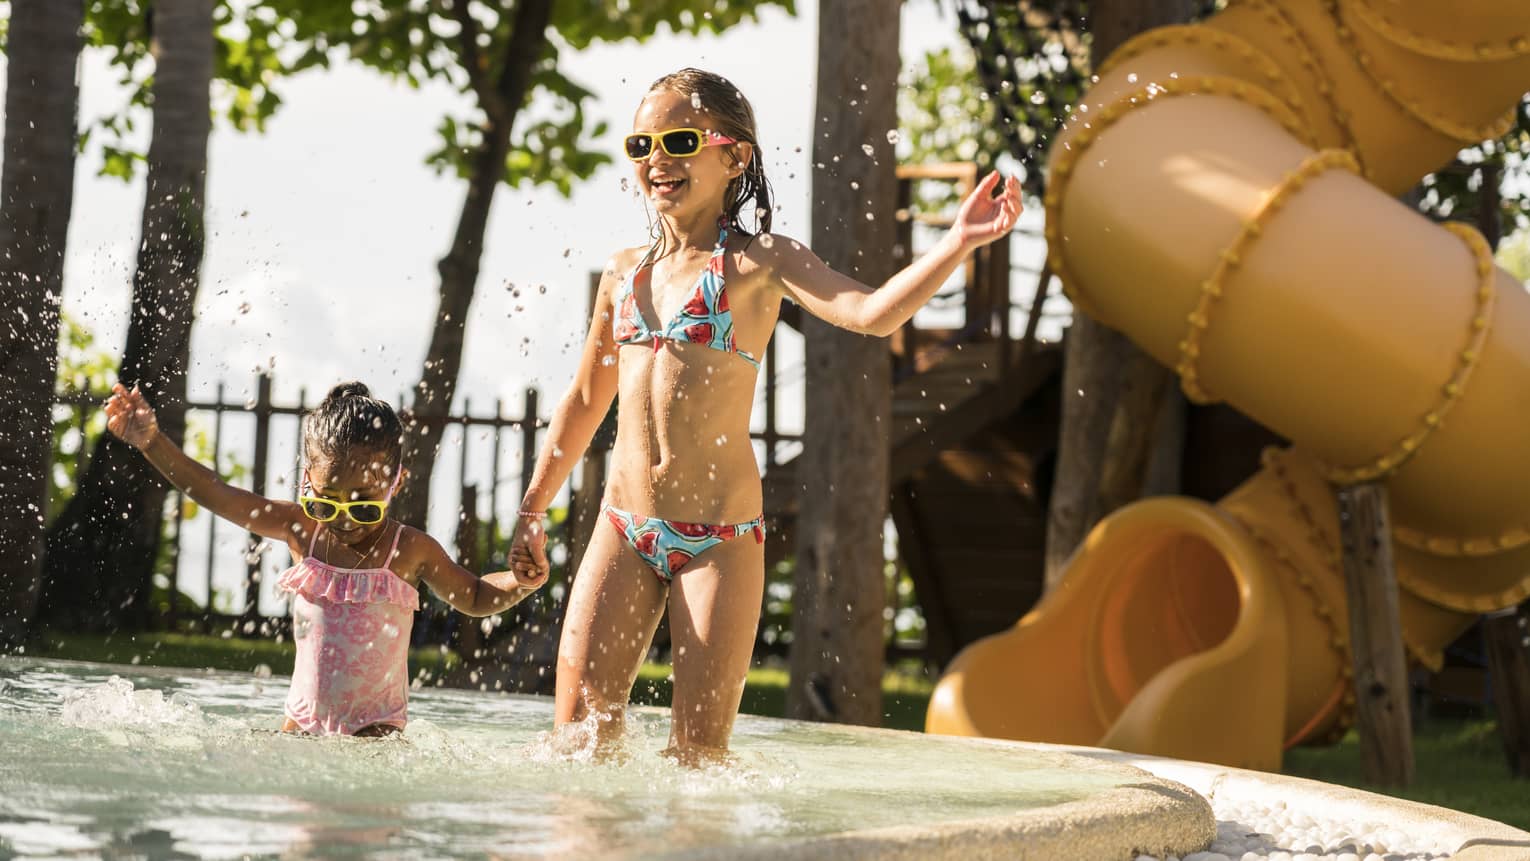 Two young girls splash in the kiddie pool, a water slide in the background